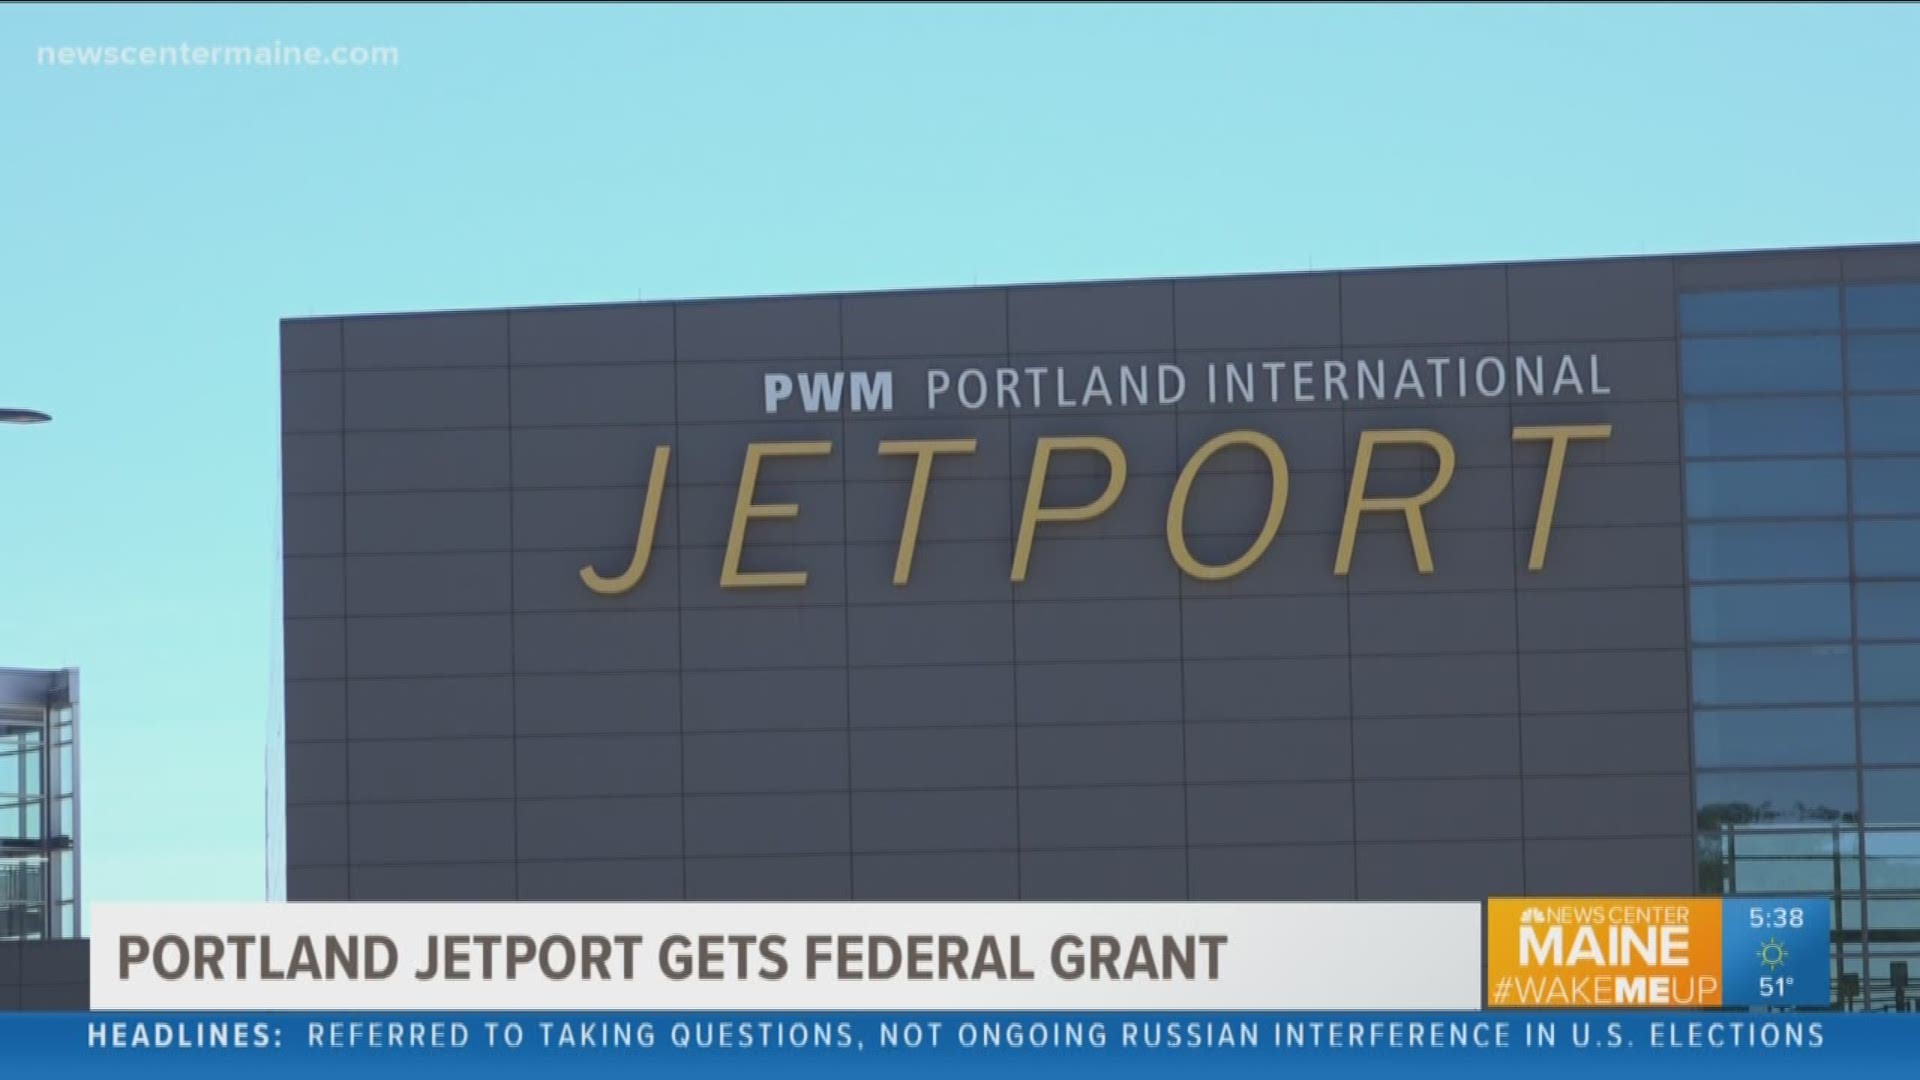 THE PORTLAND INTERNATIONAL JETPORT IS SET TO EXPAND ITS ABILITY TO HANDLE PASSENGERS